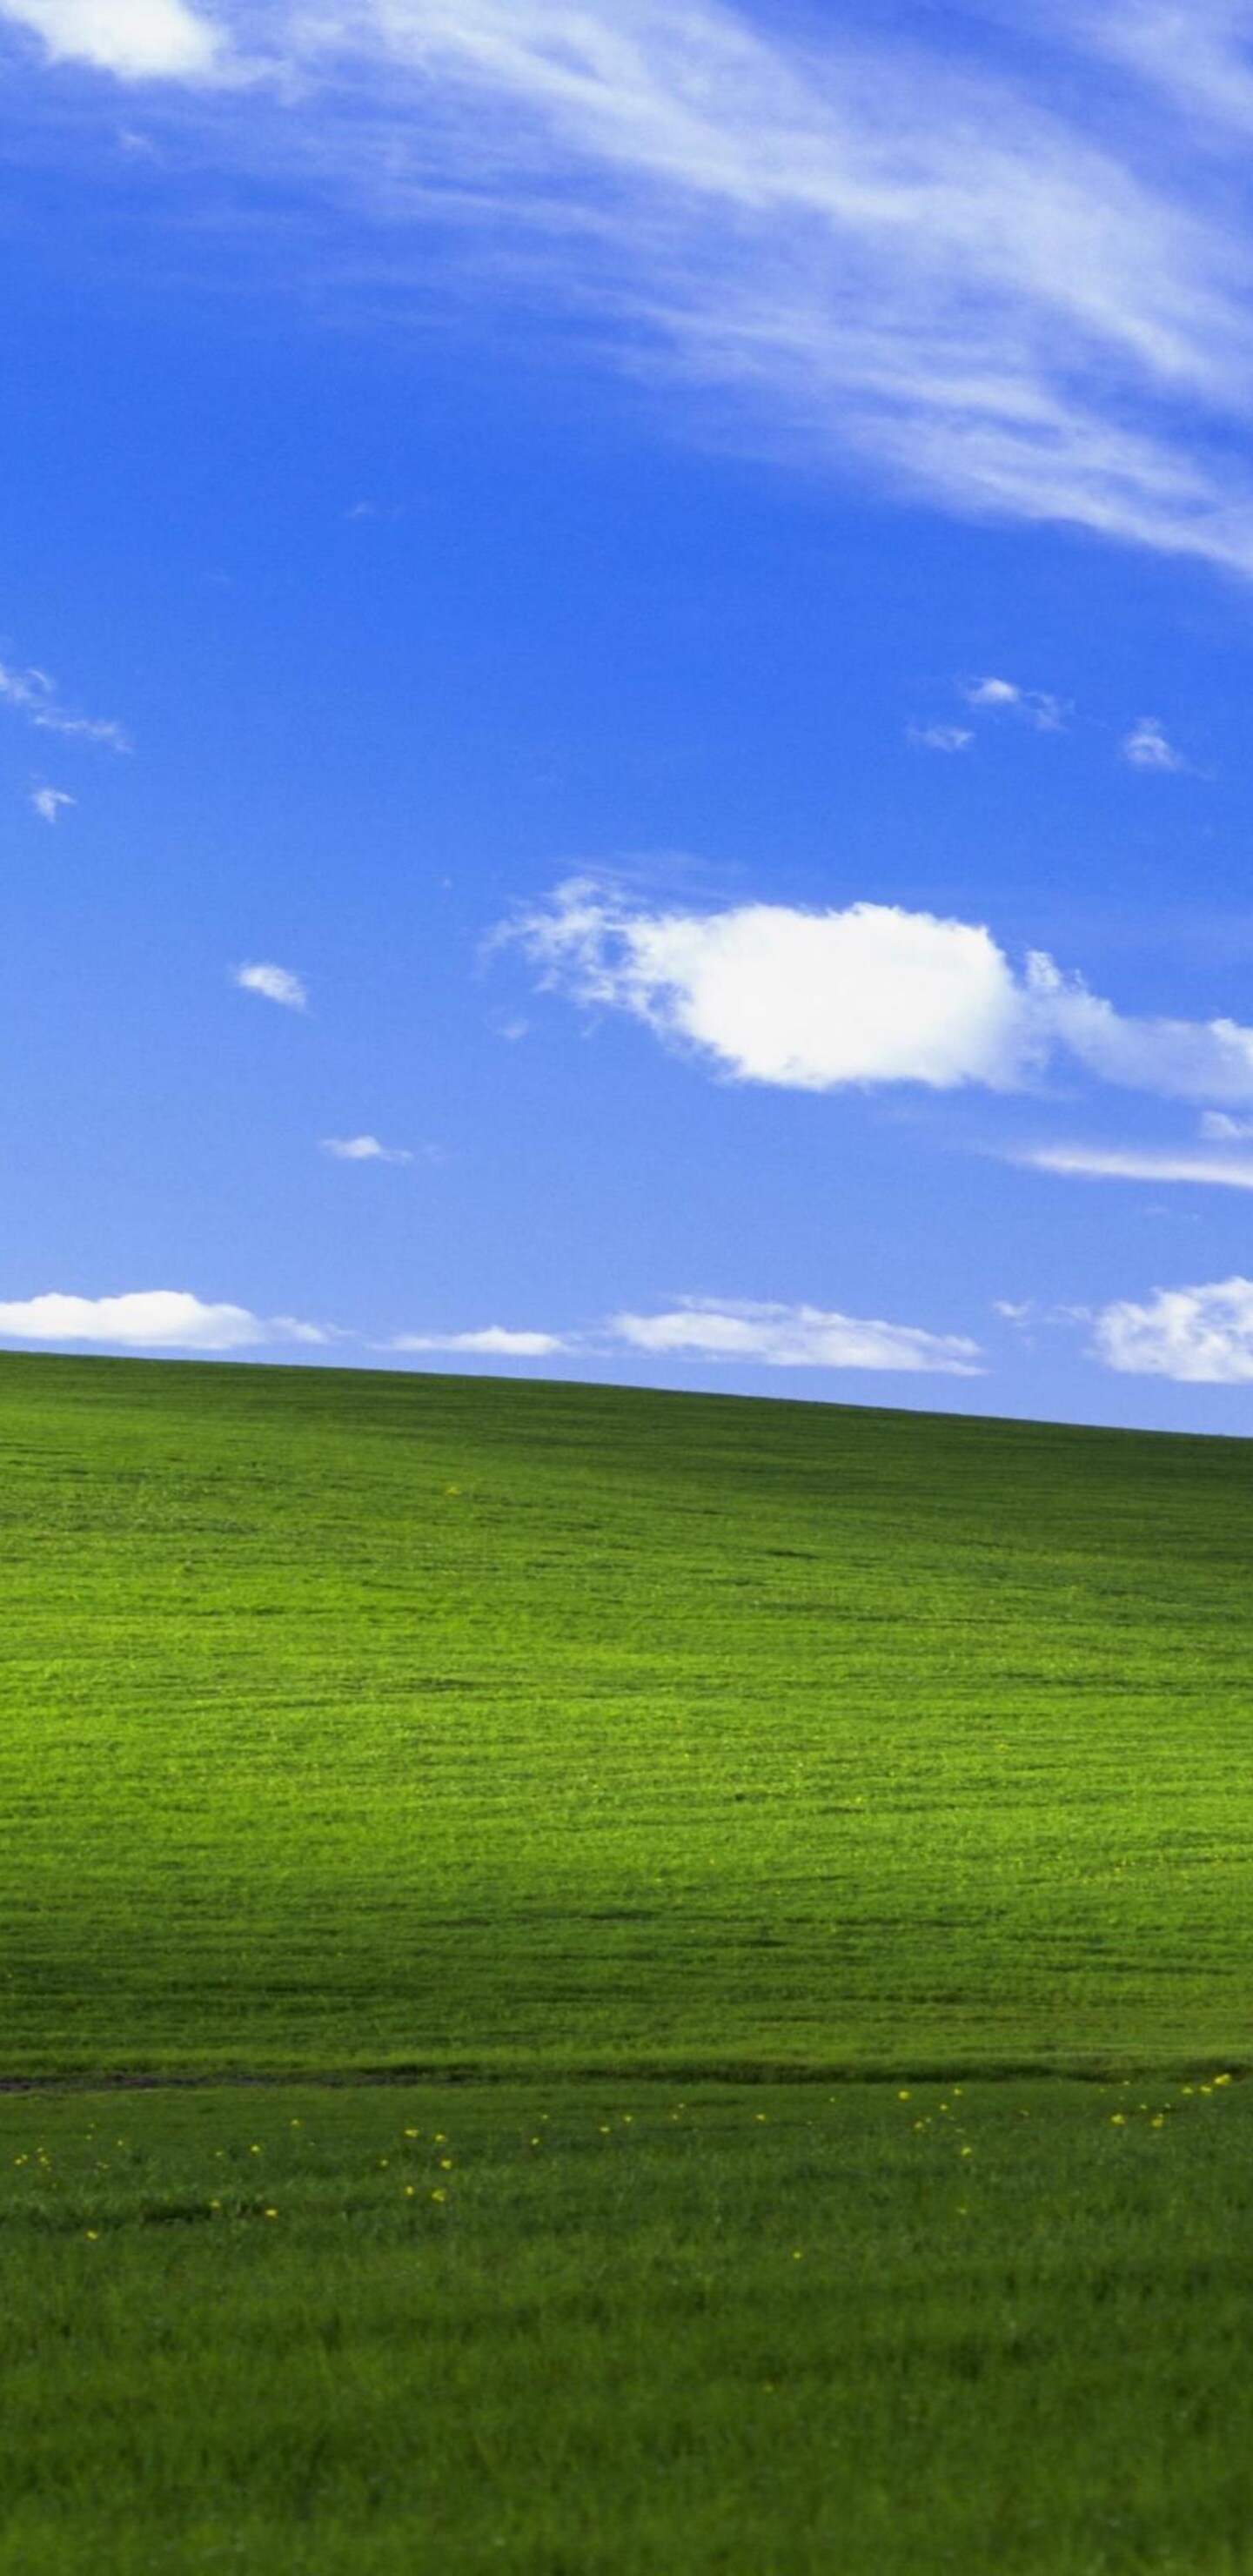 1440x2960 Windows Xp Bliss 4k Samsung Galaxy Note 9,8, S9,S8,S8+ QHD HD 4k  Wallpapers, Images, Backgrounds, Photos and Pictures